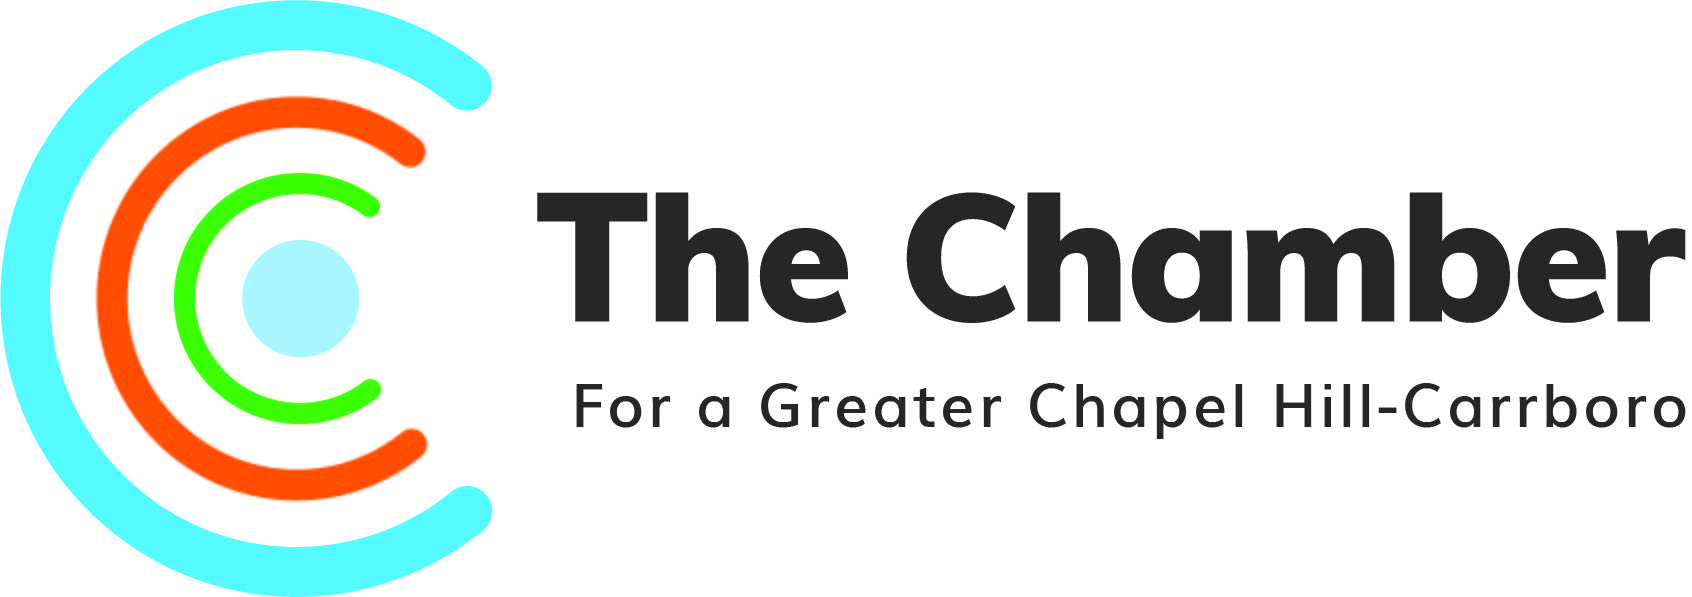 The Chamber For a Greater Chapel Hill-Carrboro